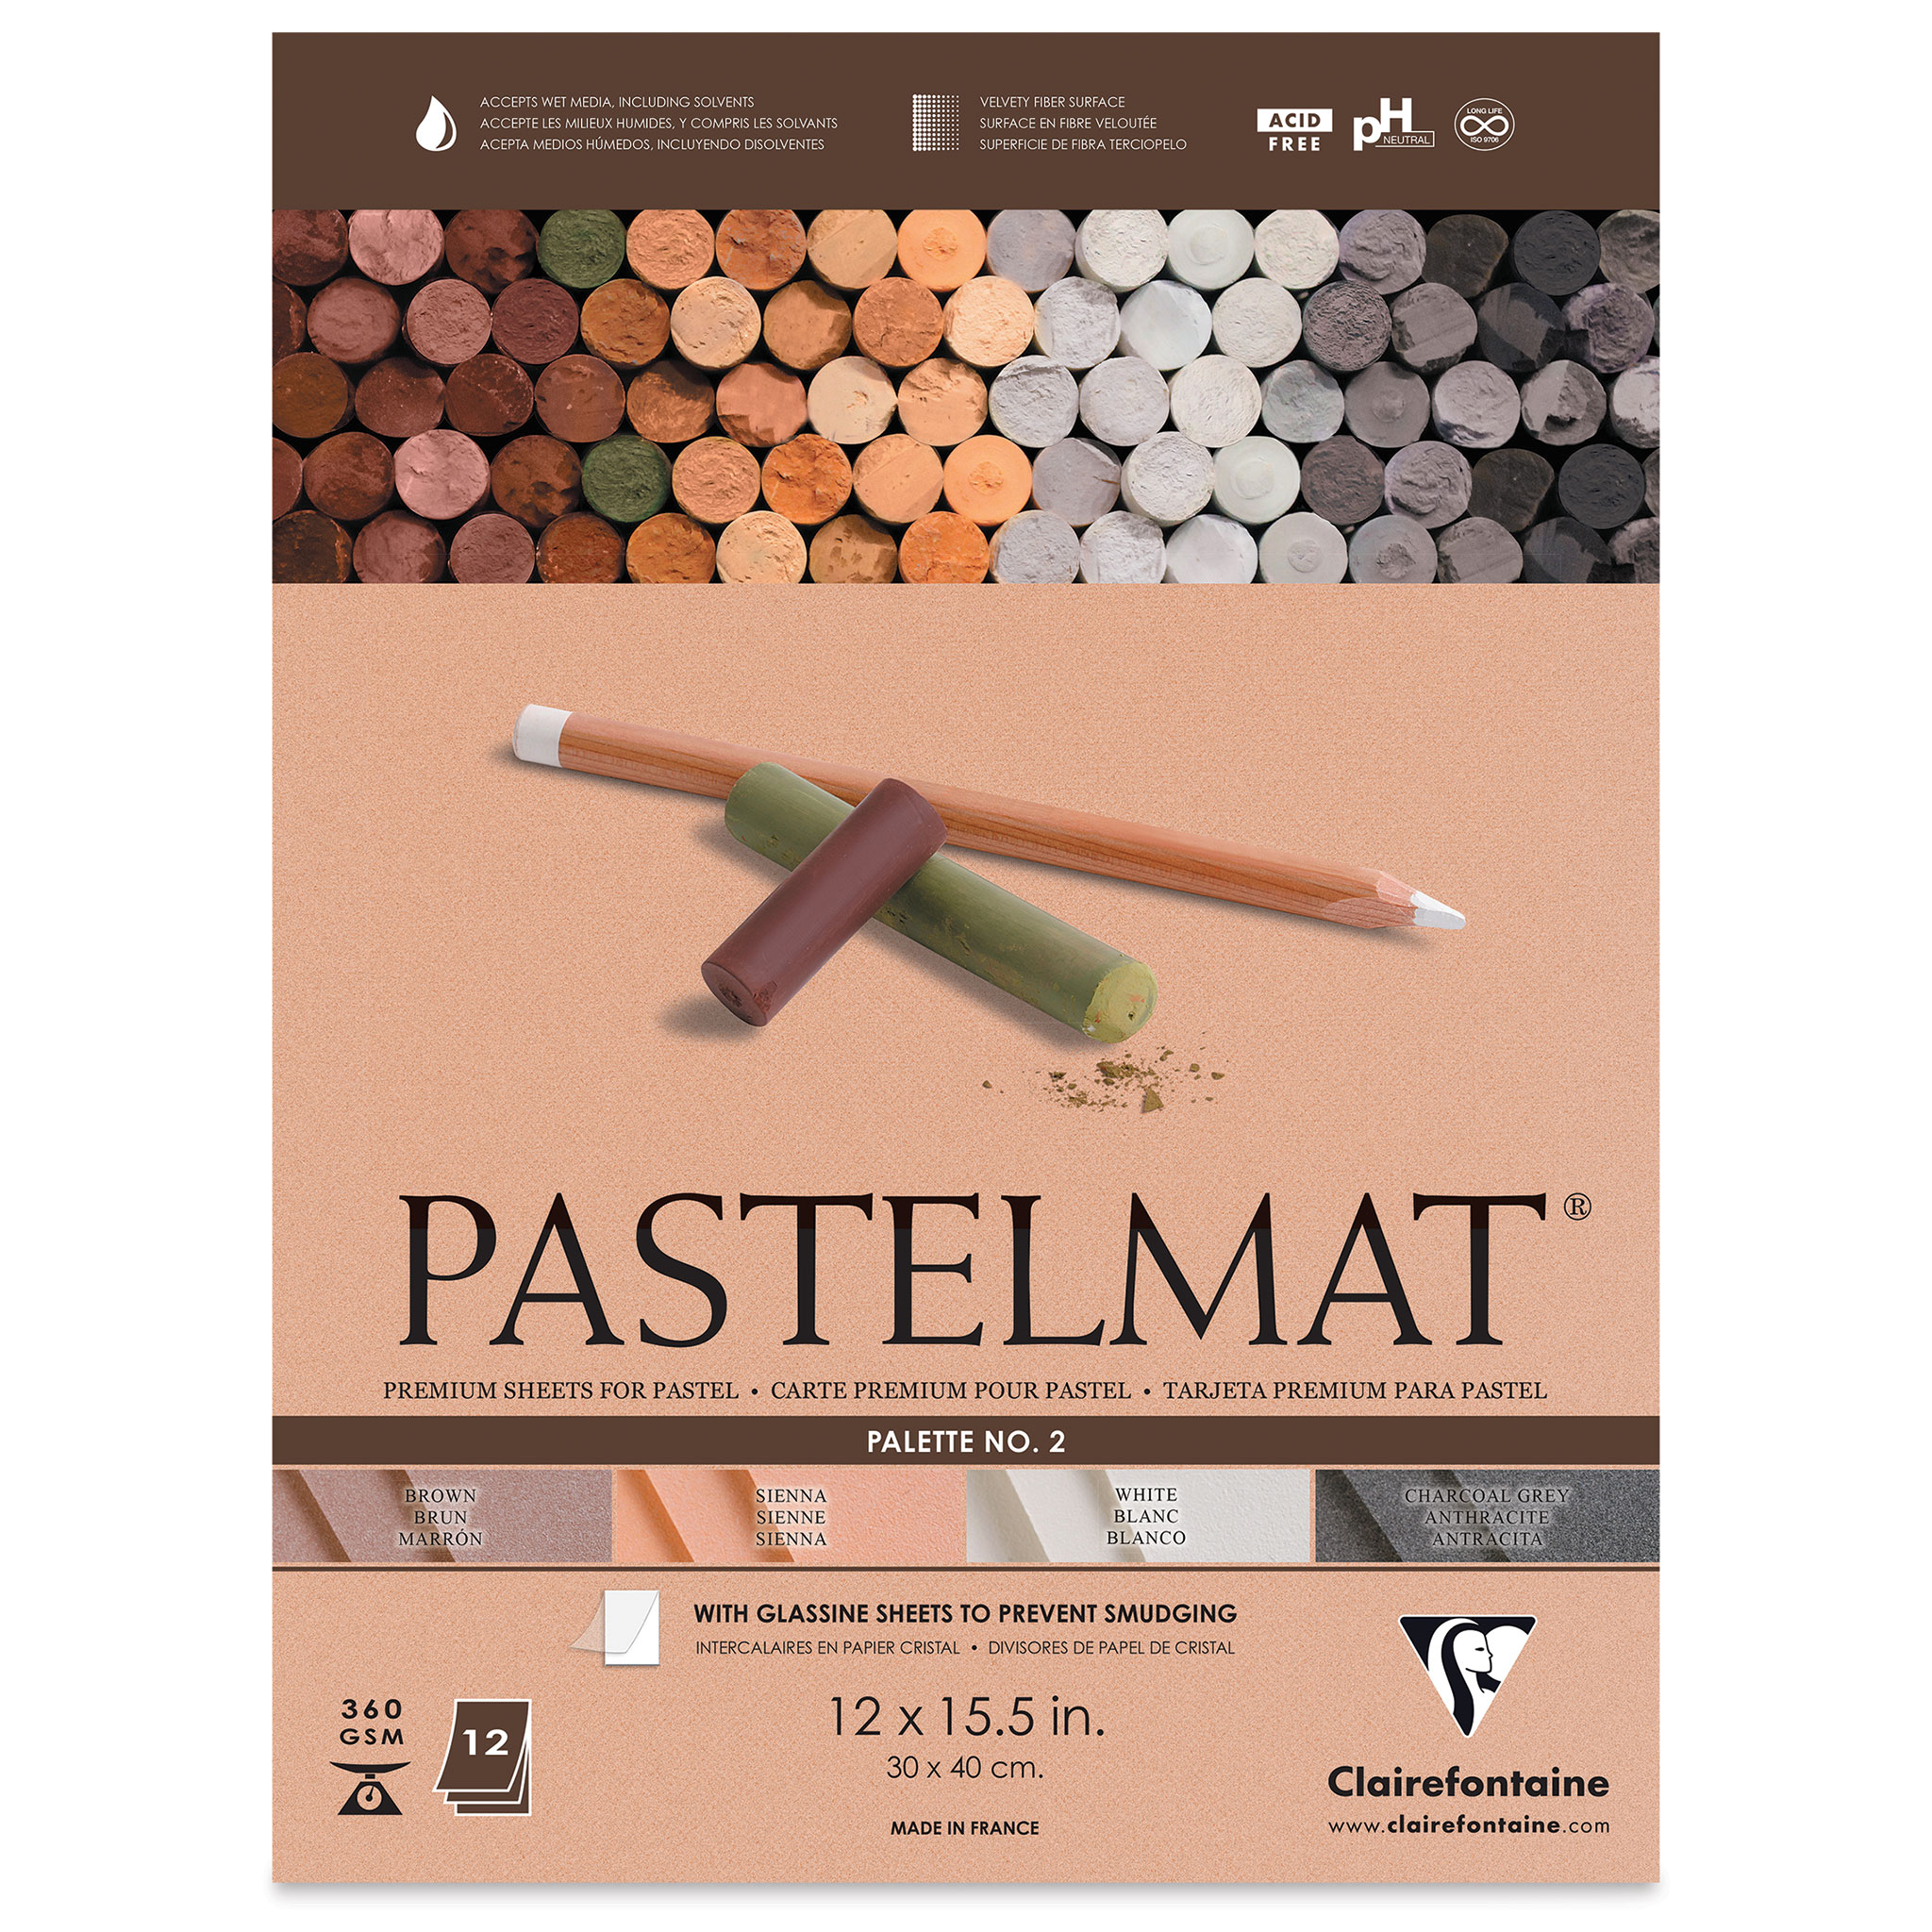 3 Top Tips to use When Working on Clairefontaine Pastelmat 